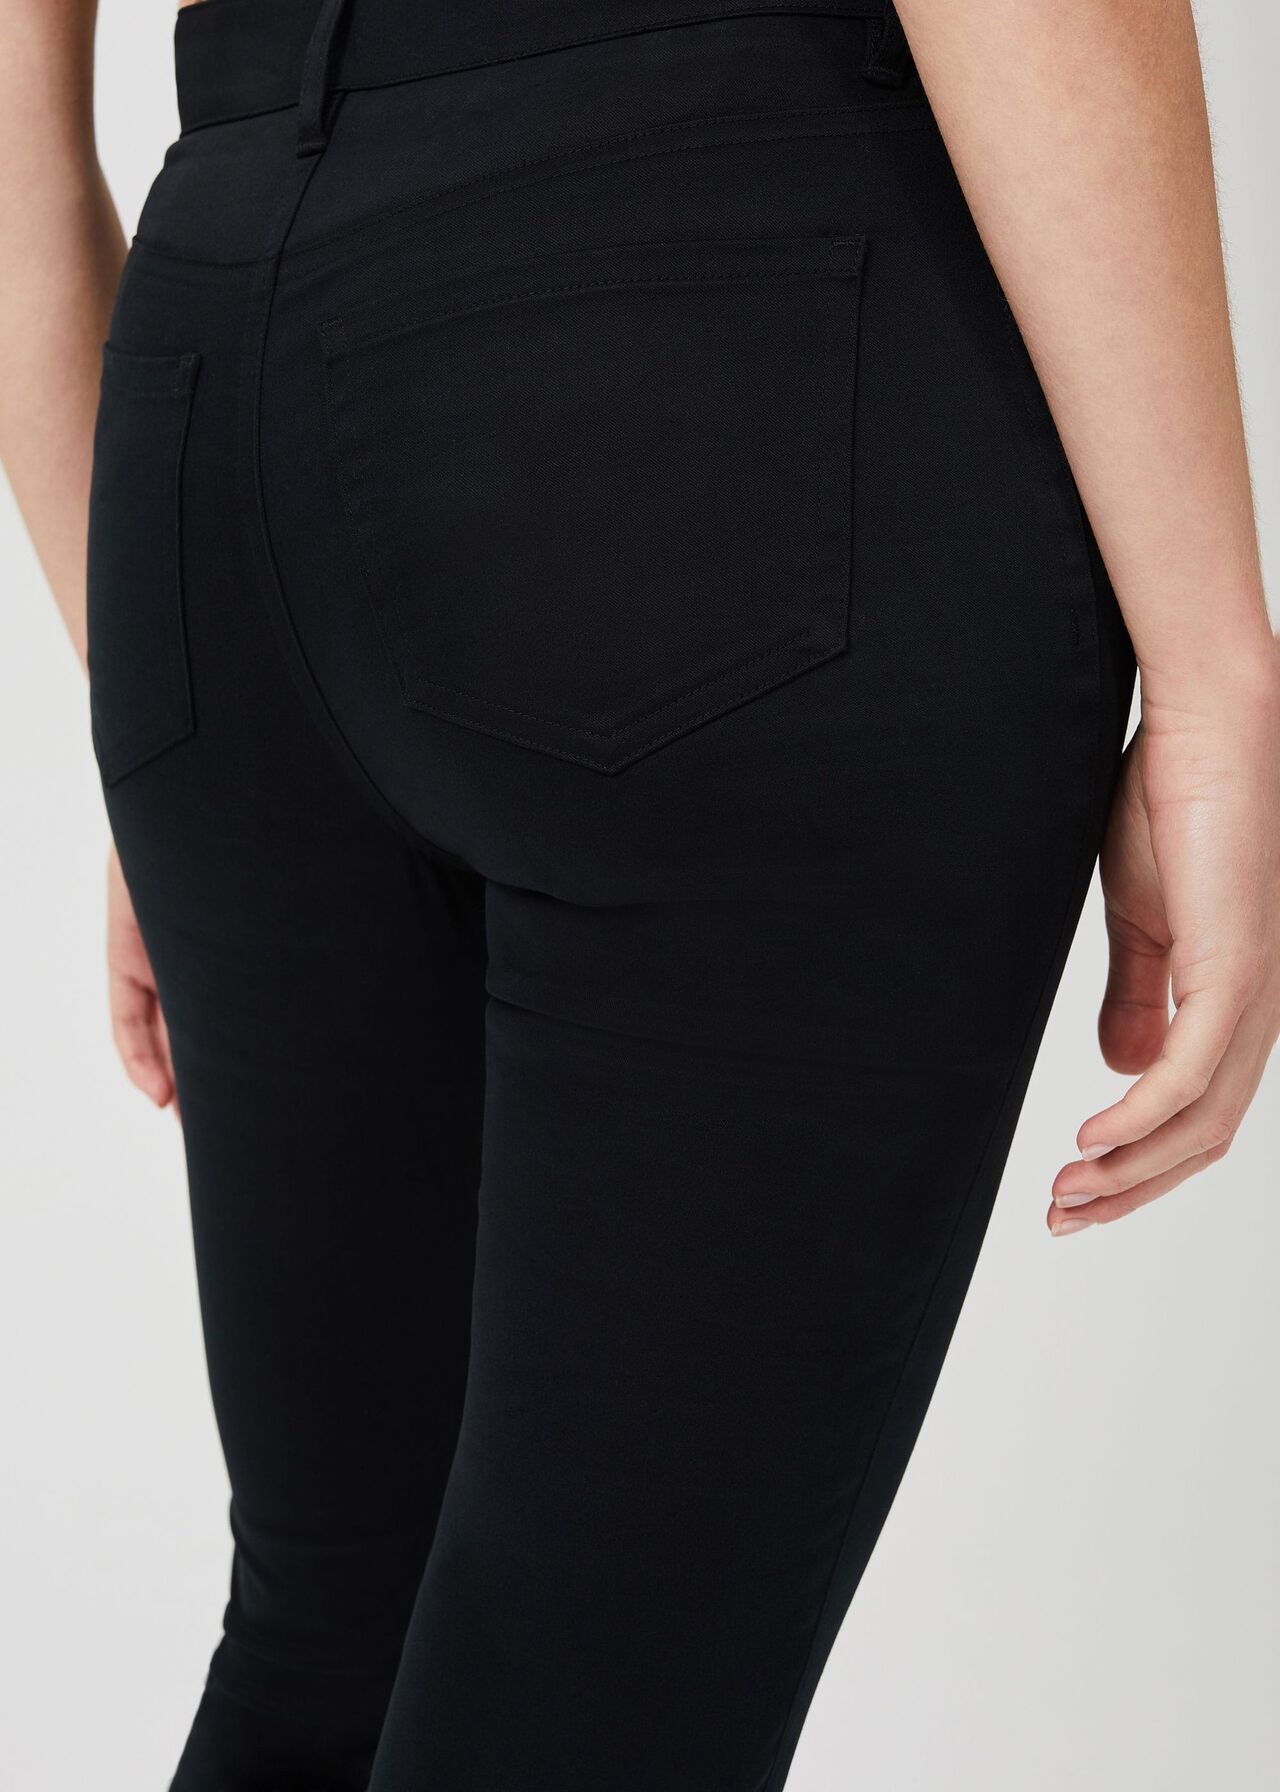 Soft Touch Gia Skinny Jeans, Black, hi-res